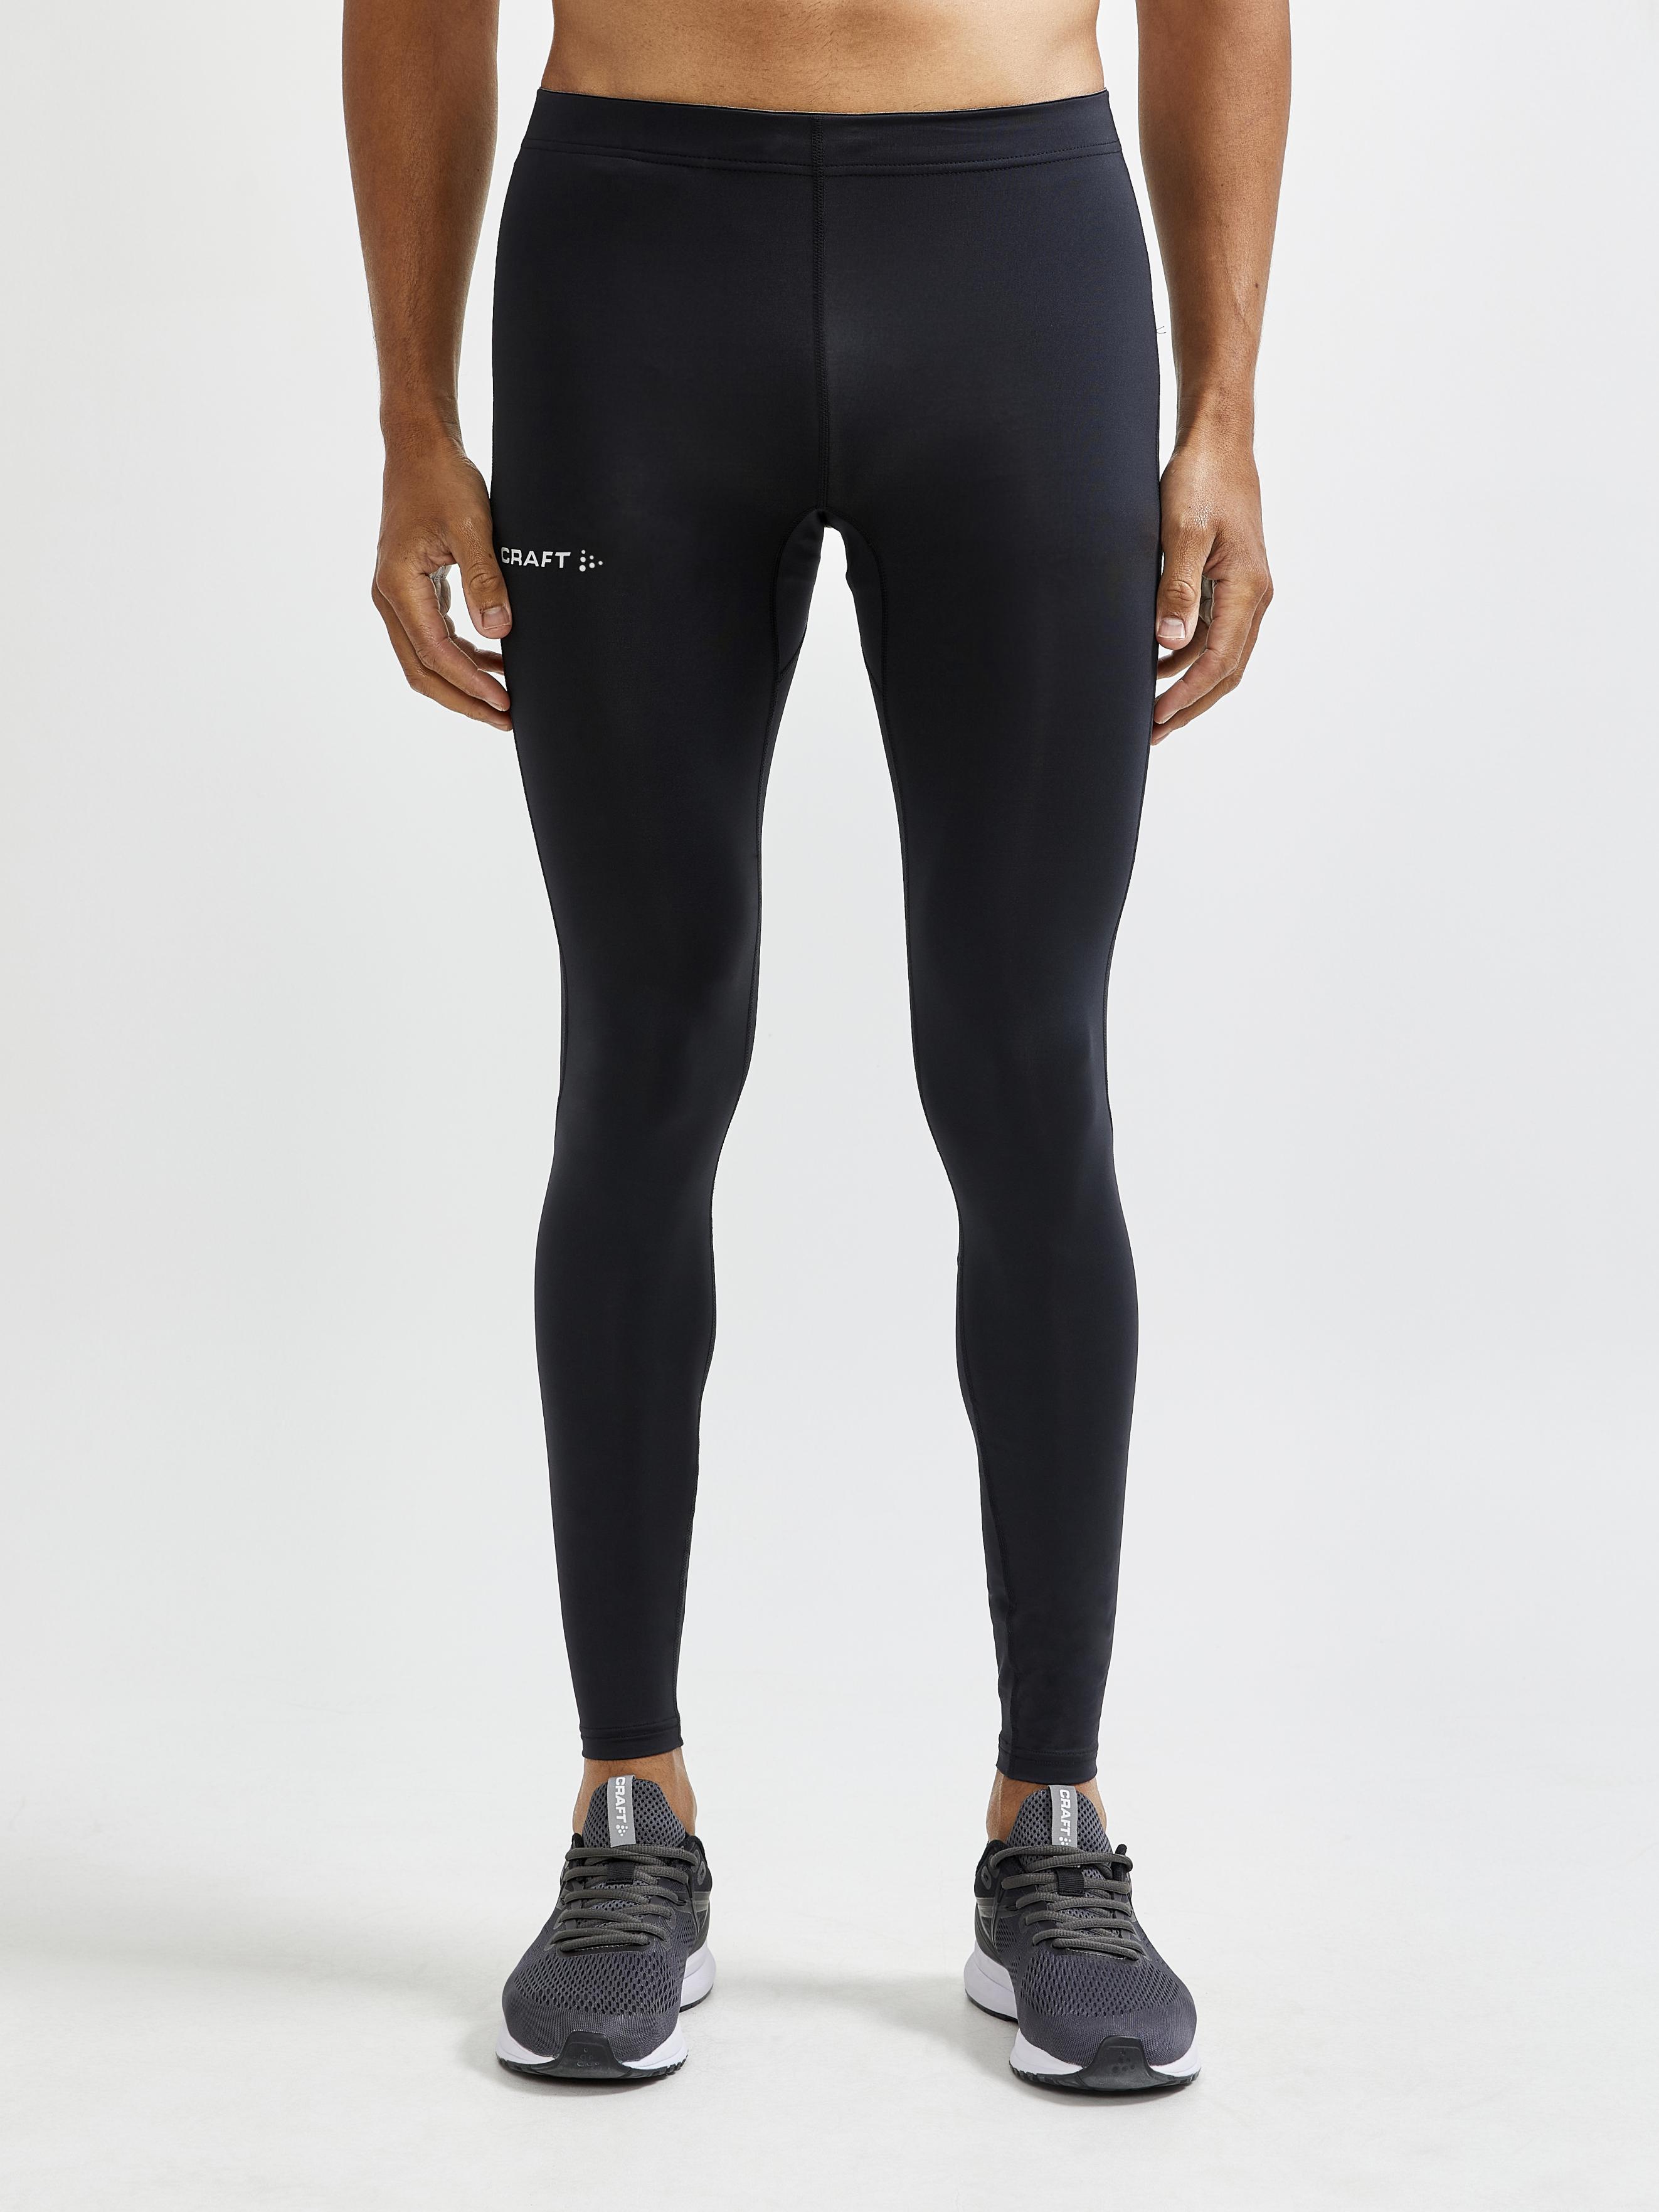 Compression Tights, Pants, & Leggings, Compression Wear & Clothing